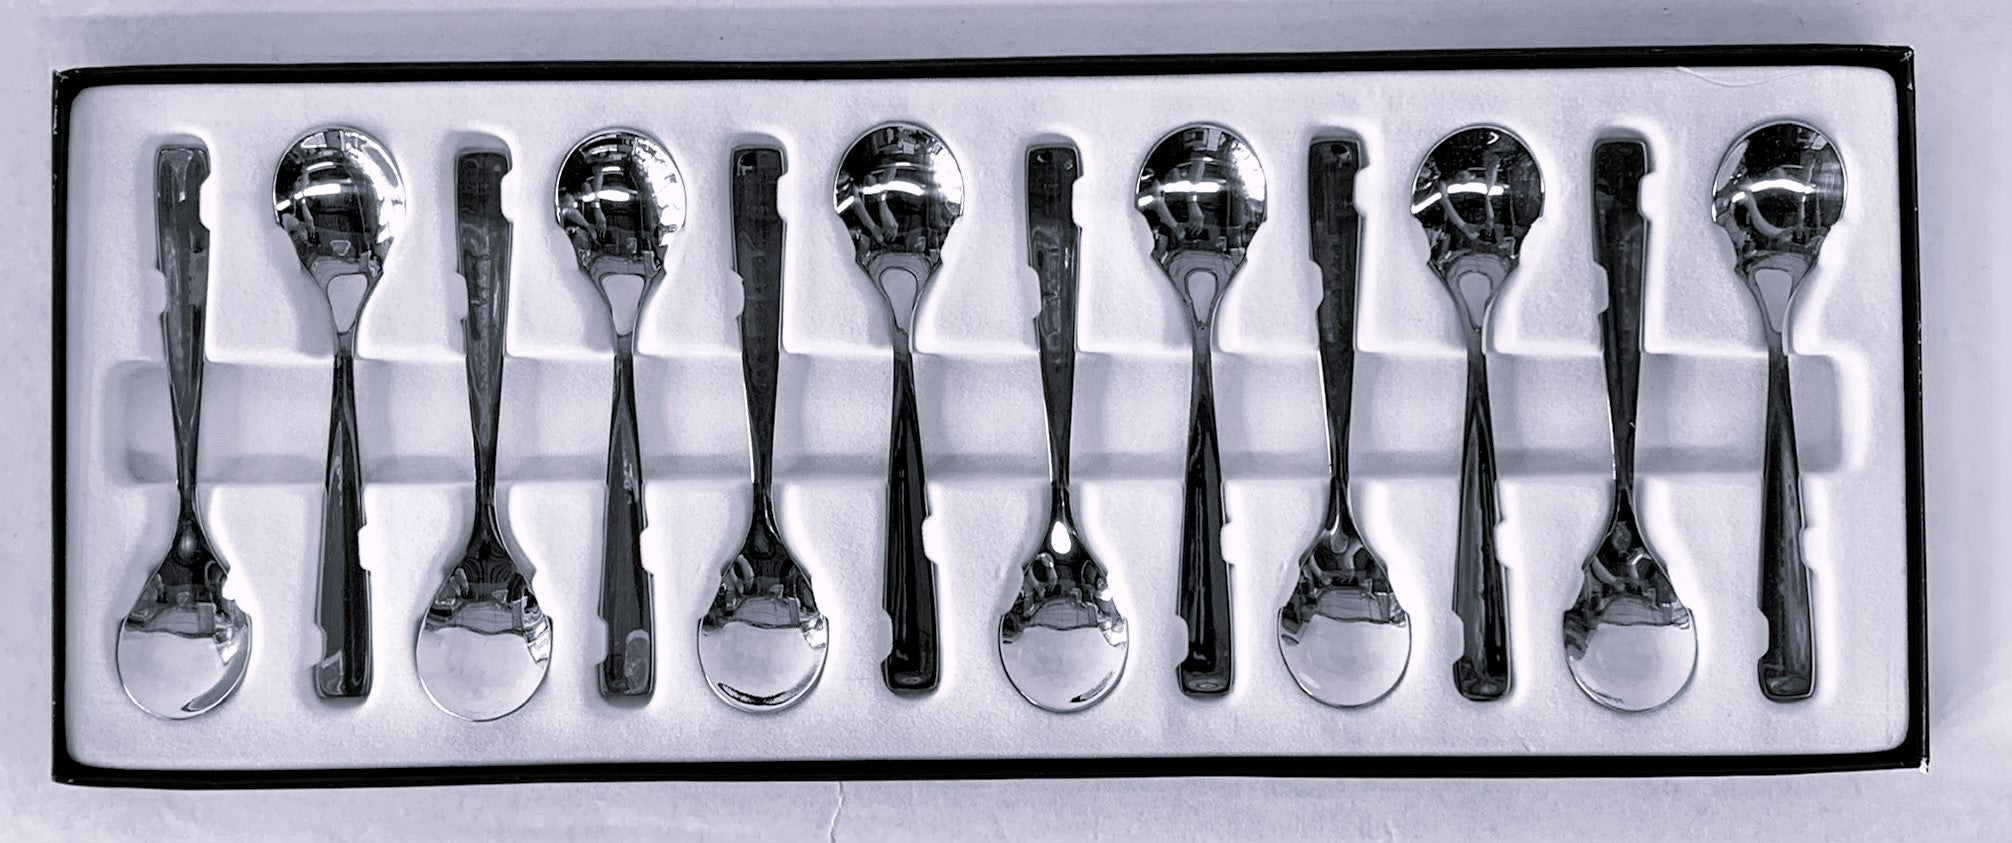 Espresso Spoons 12 piece Set 18/10 Stainless Steel.